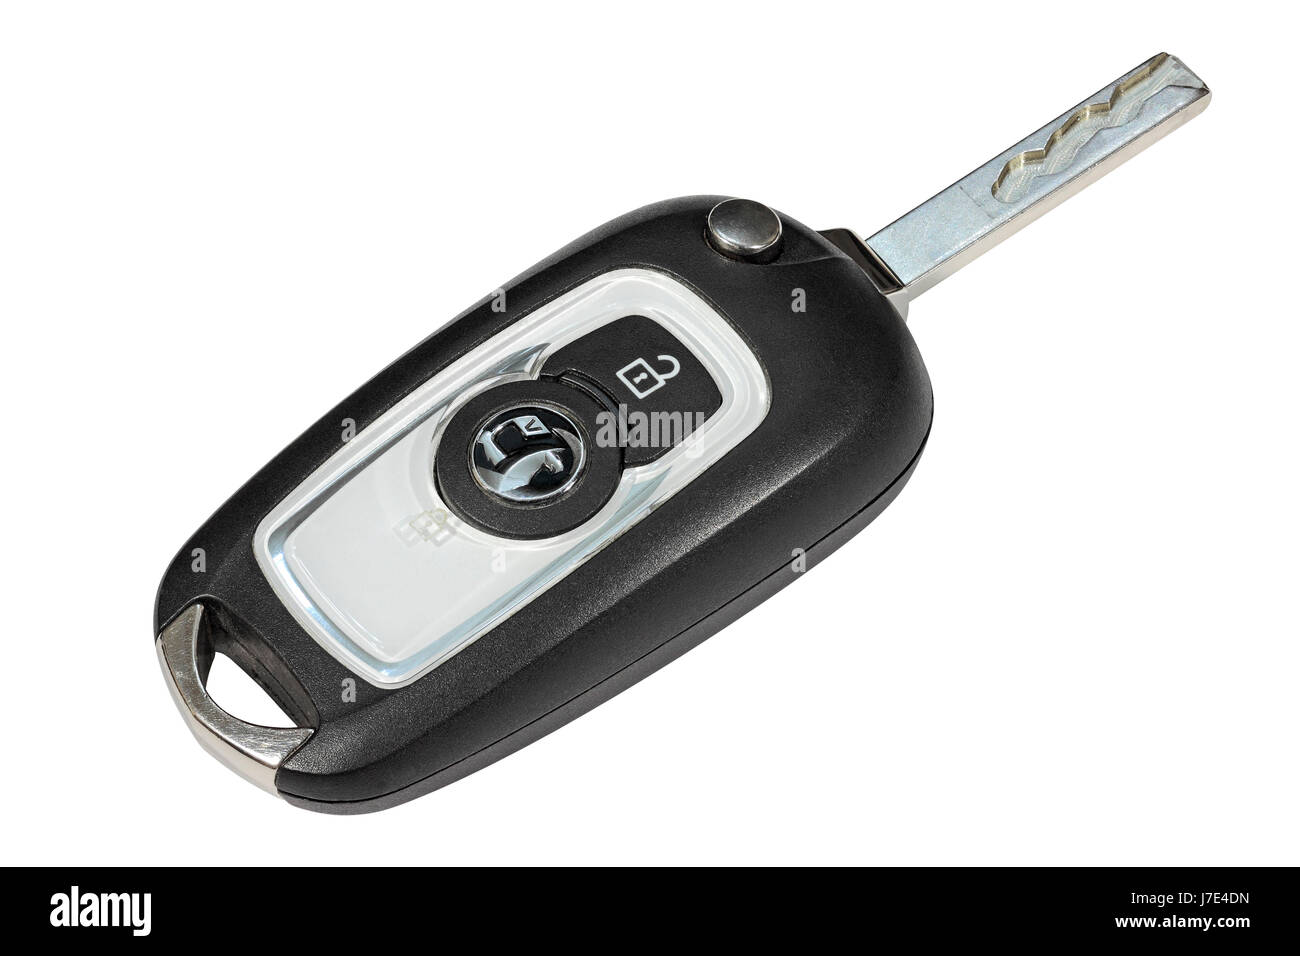 A Vauxhall Astra K Car Key isolated on a white background Stock Photo